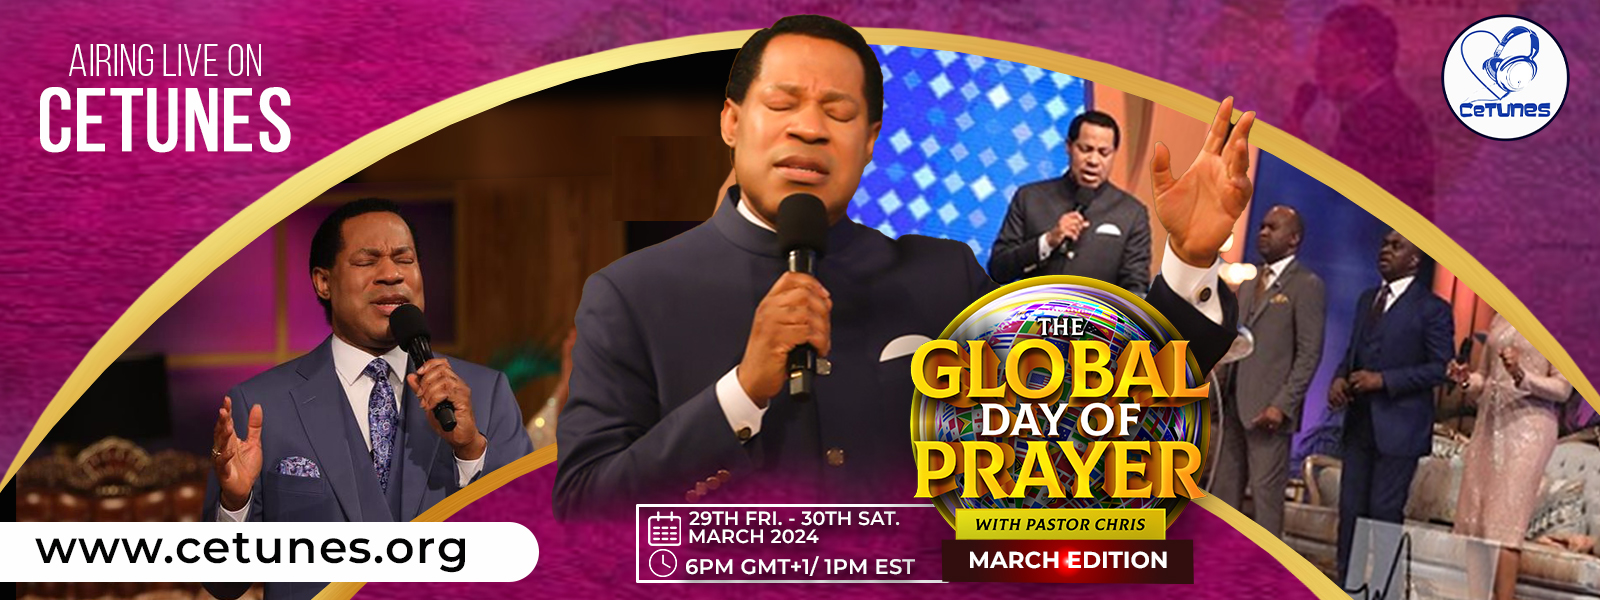 THE GLOBAL DAY OF PRAYER WITH PASTOR CHRIS MARCH EDITION